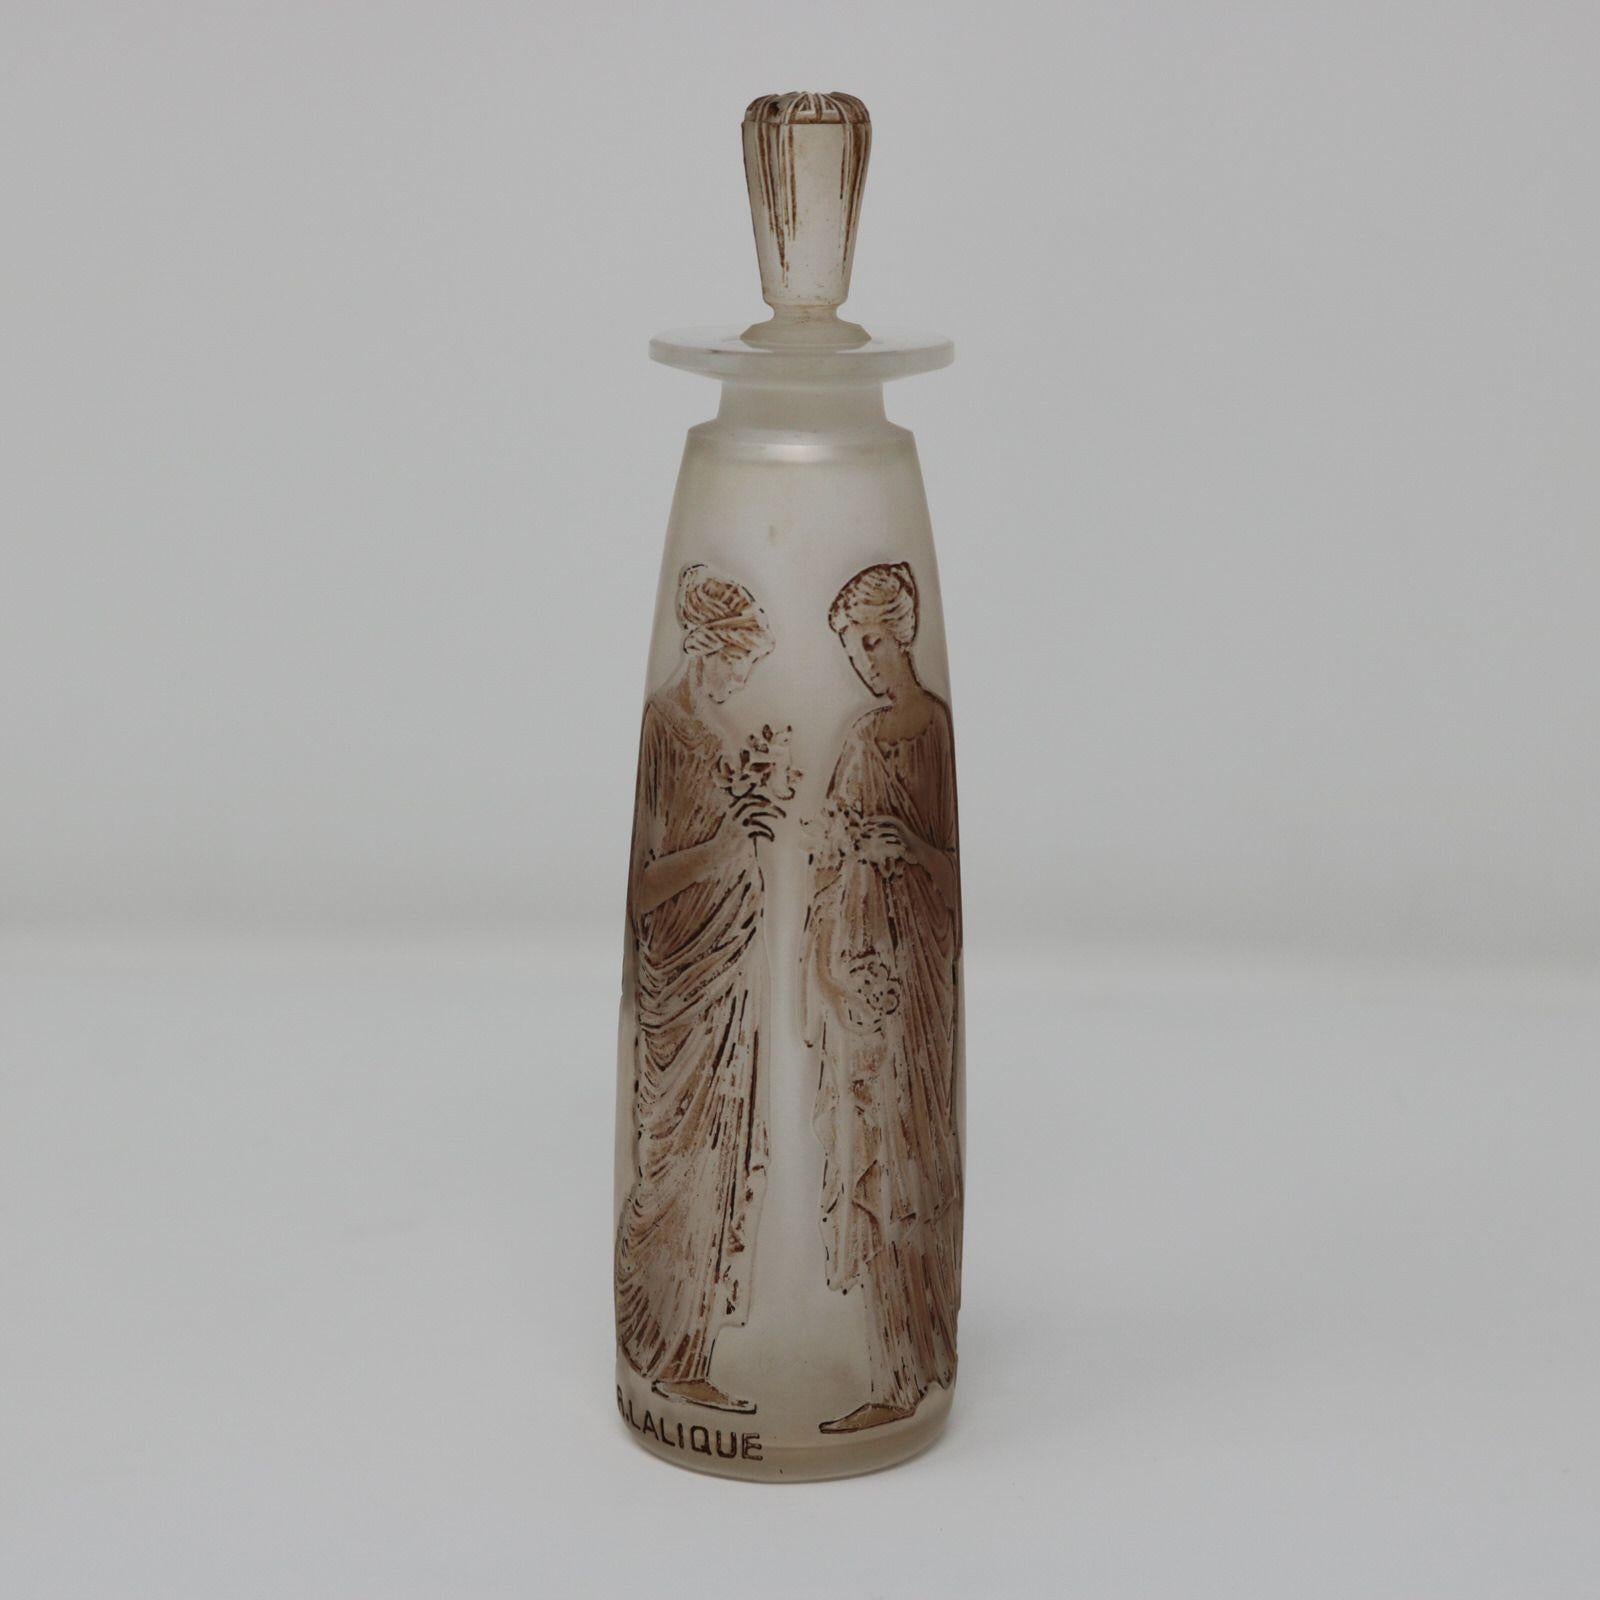 Rene Lalique clear & frosted, sepia stained glass perfume bottle. 'Ambre antique' design. This design features robed maidens, holding flower bouquets. Moulded makers mark, 'R LALIQUE'. Book reference: Marcilhac Coty 3.